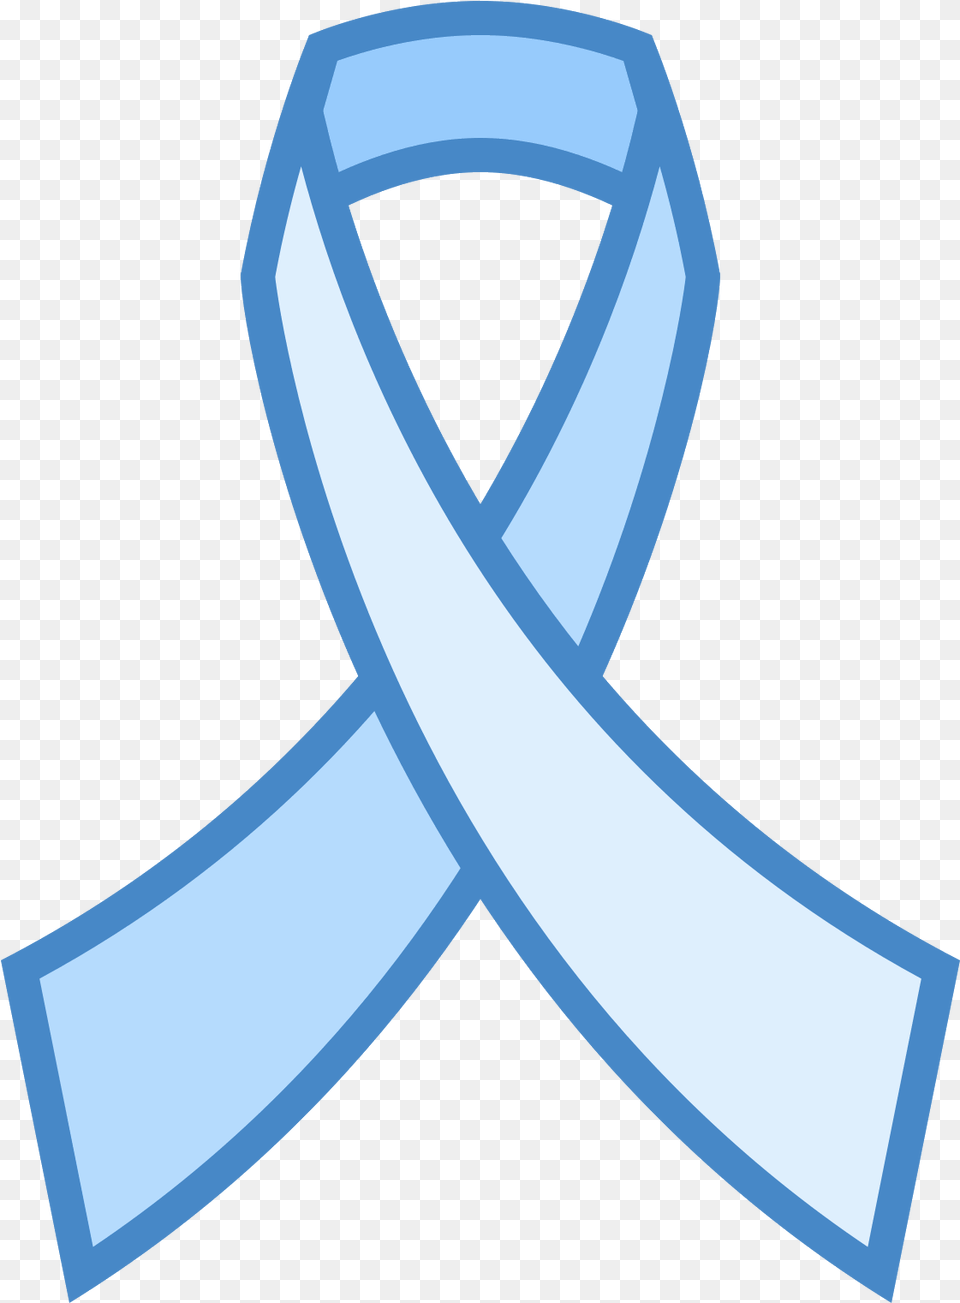 Blue Ribbon Aids Icon With No Blue Ribbon Aids, Accessories, Formal Wear, Tie, Symbol Free Png Download